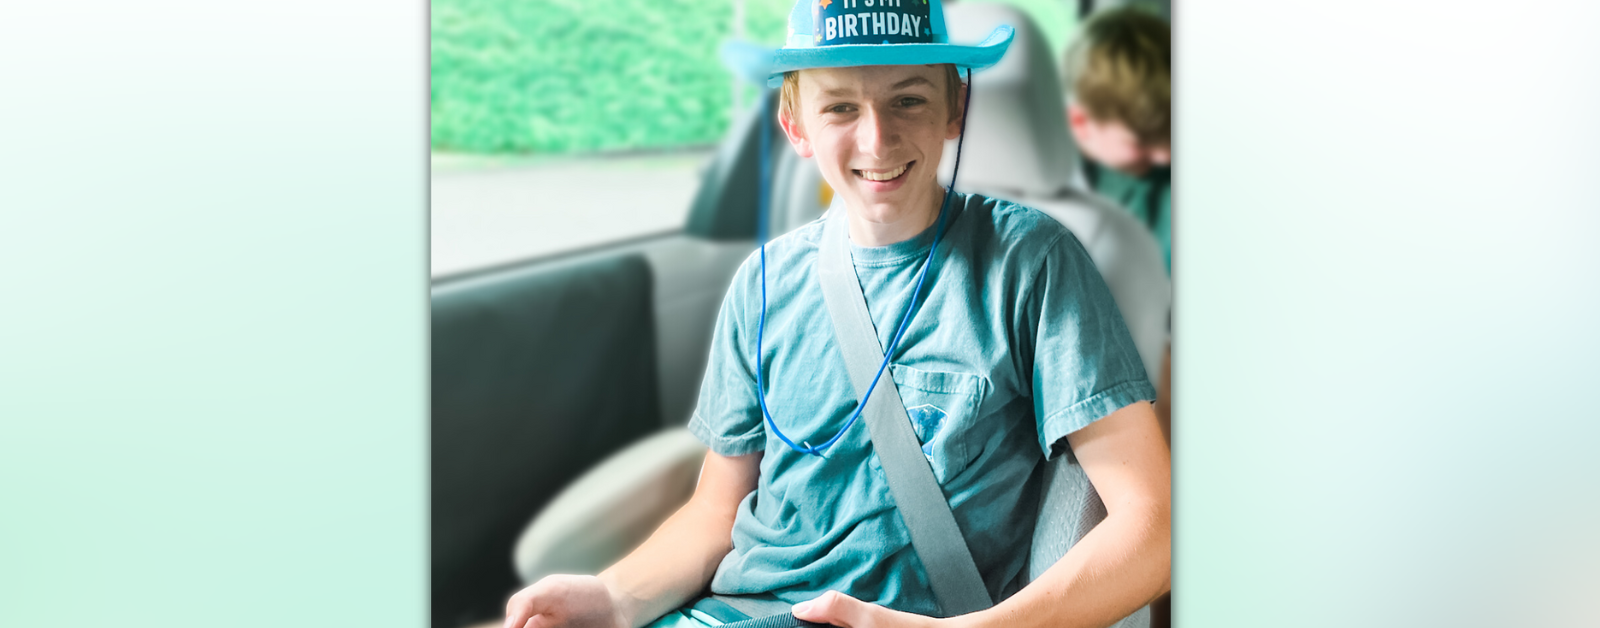 William sits in a van. He wears a blue hat that says, "It's my birthday."